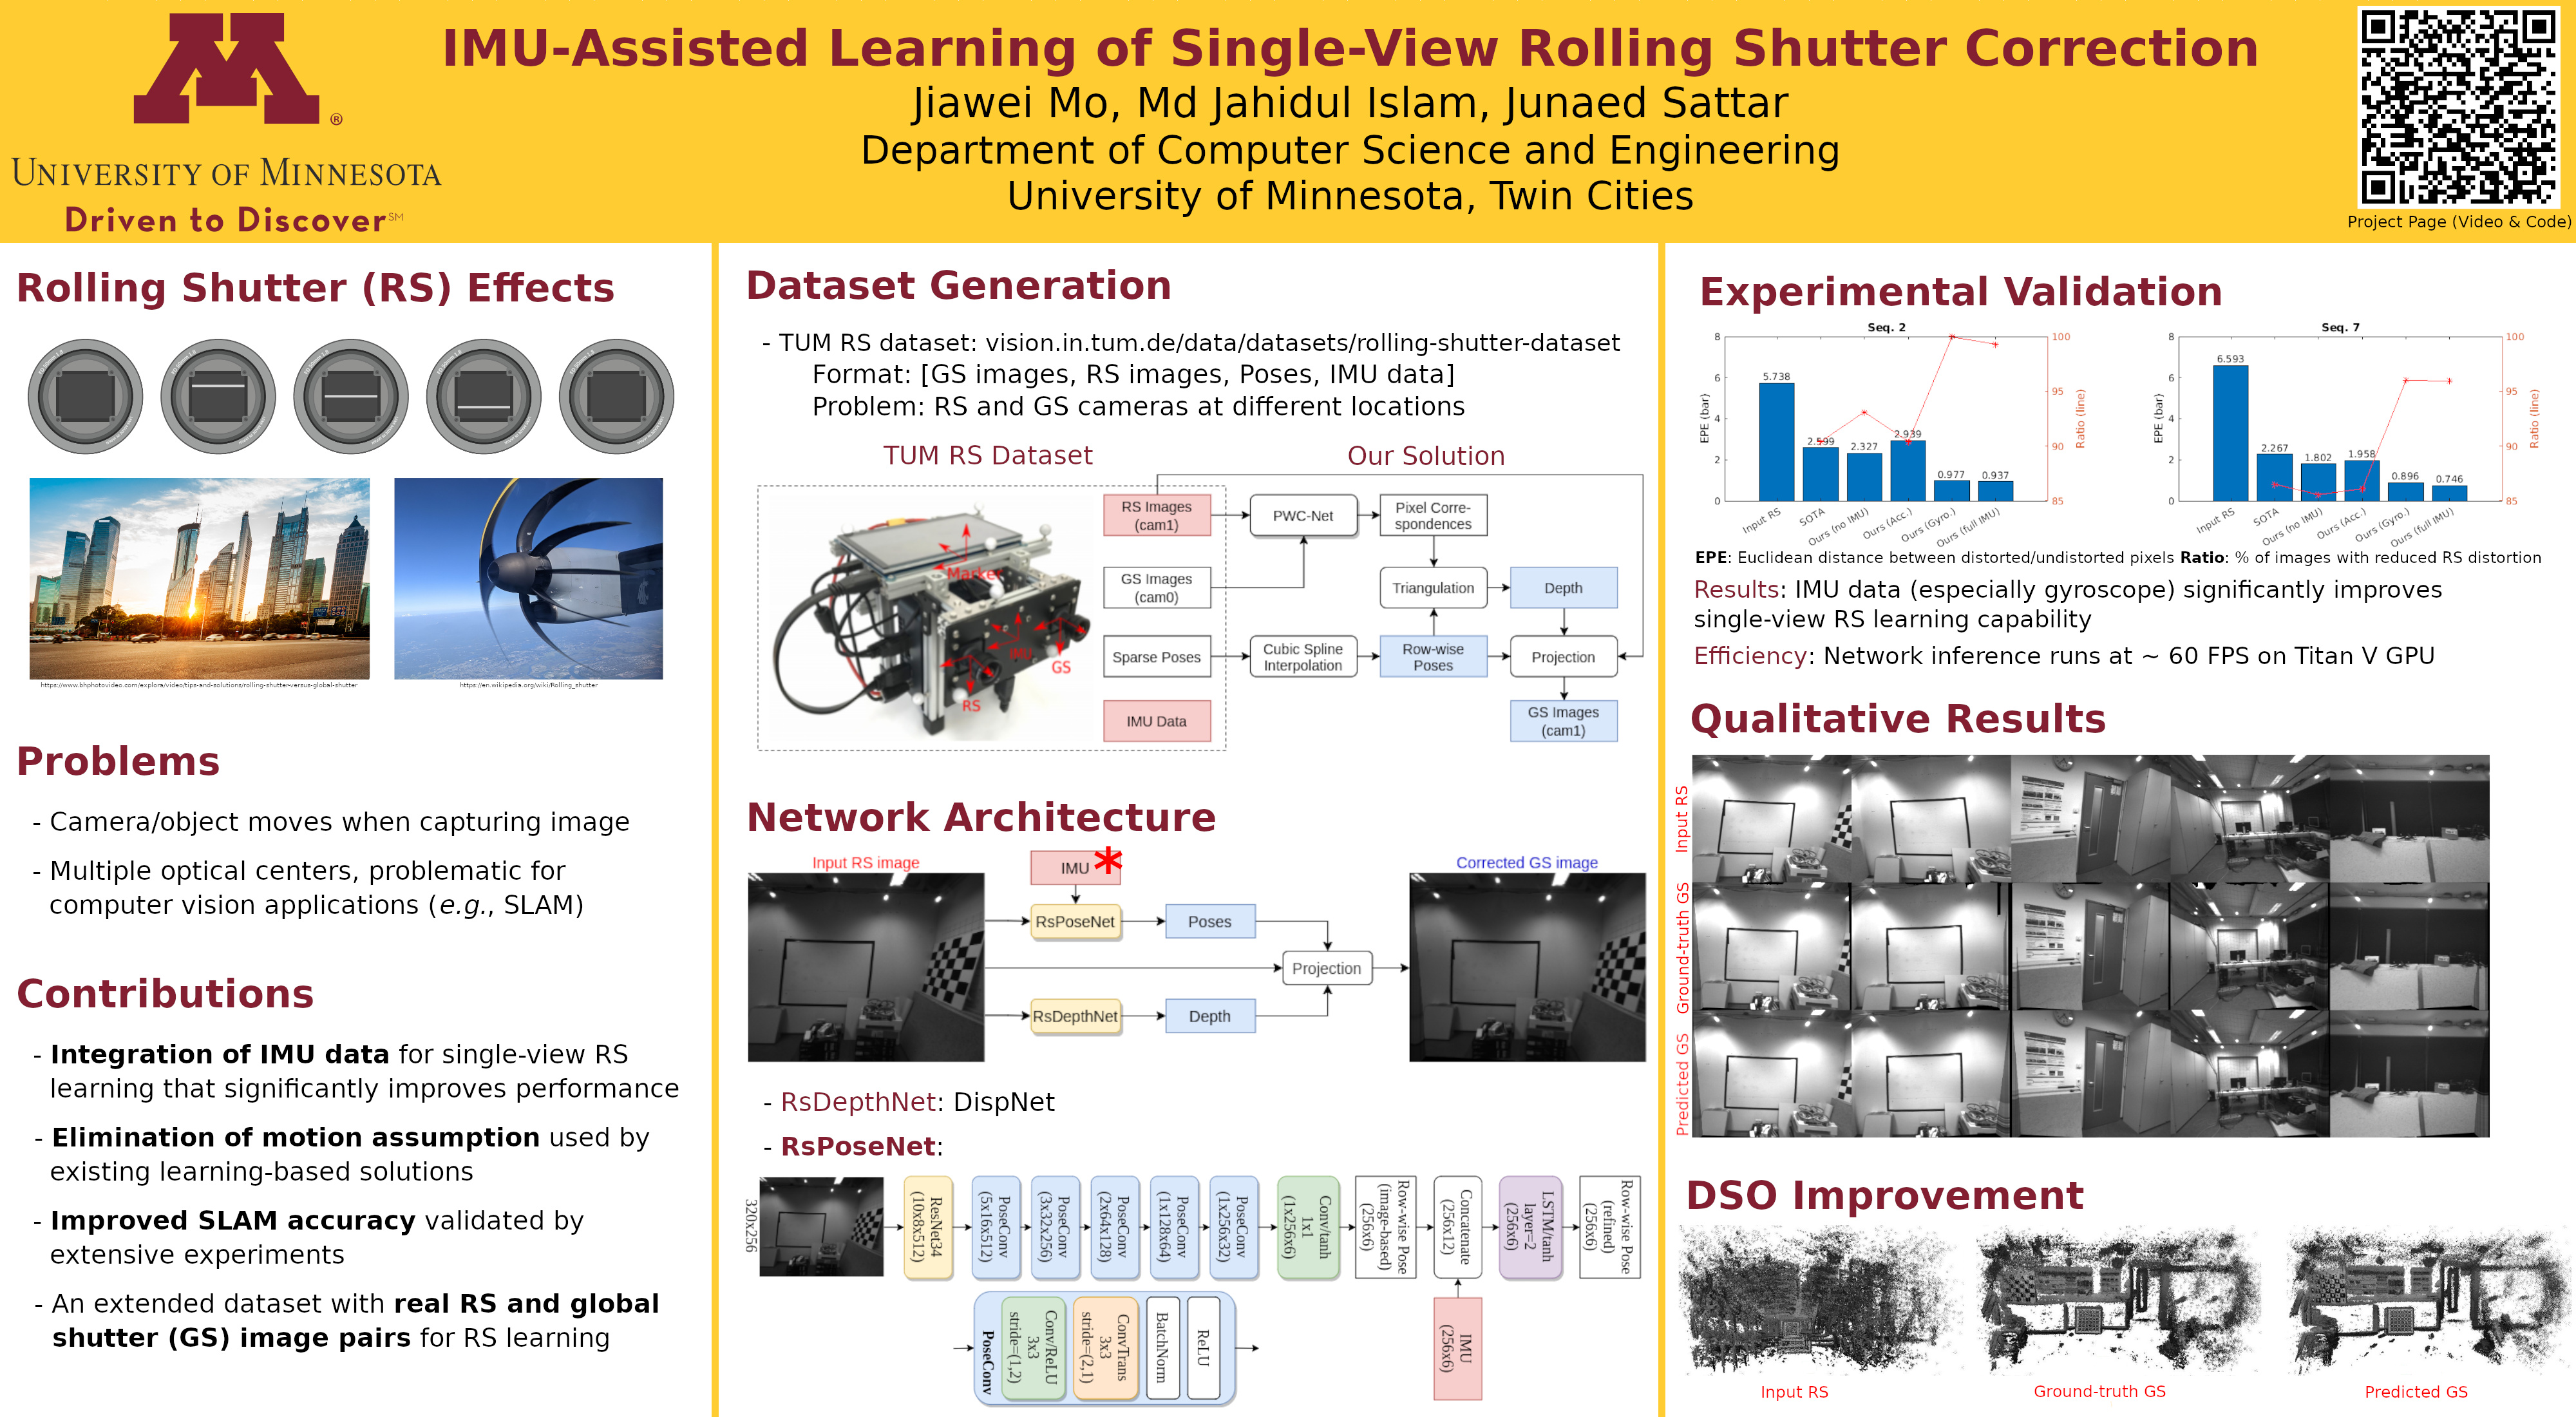 IMU-Assisted Learning of Single-View Rolling Shutter Correction poster